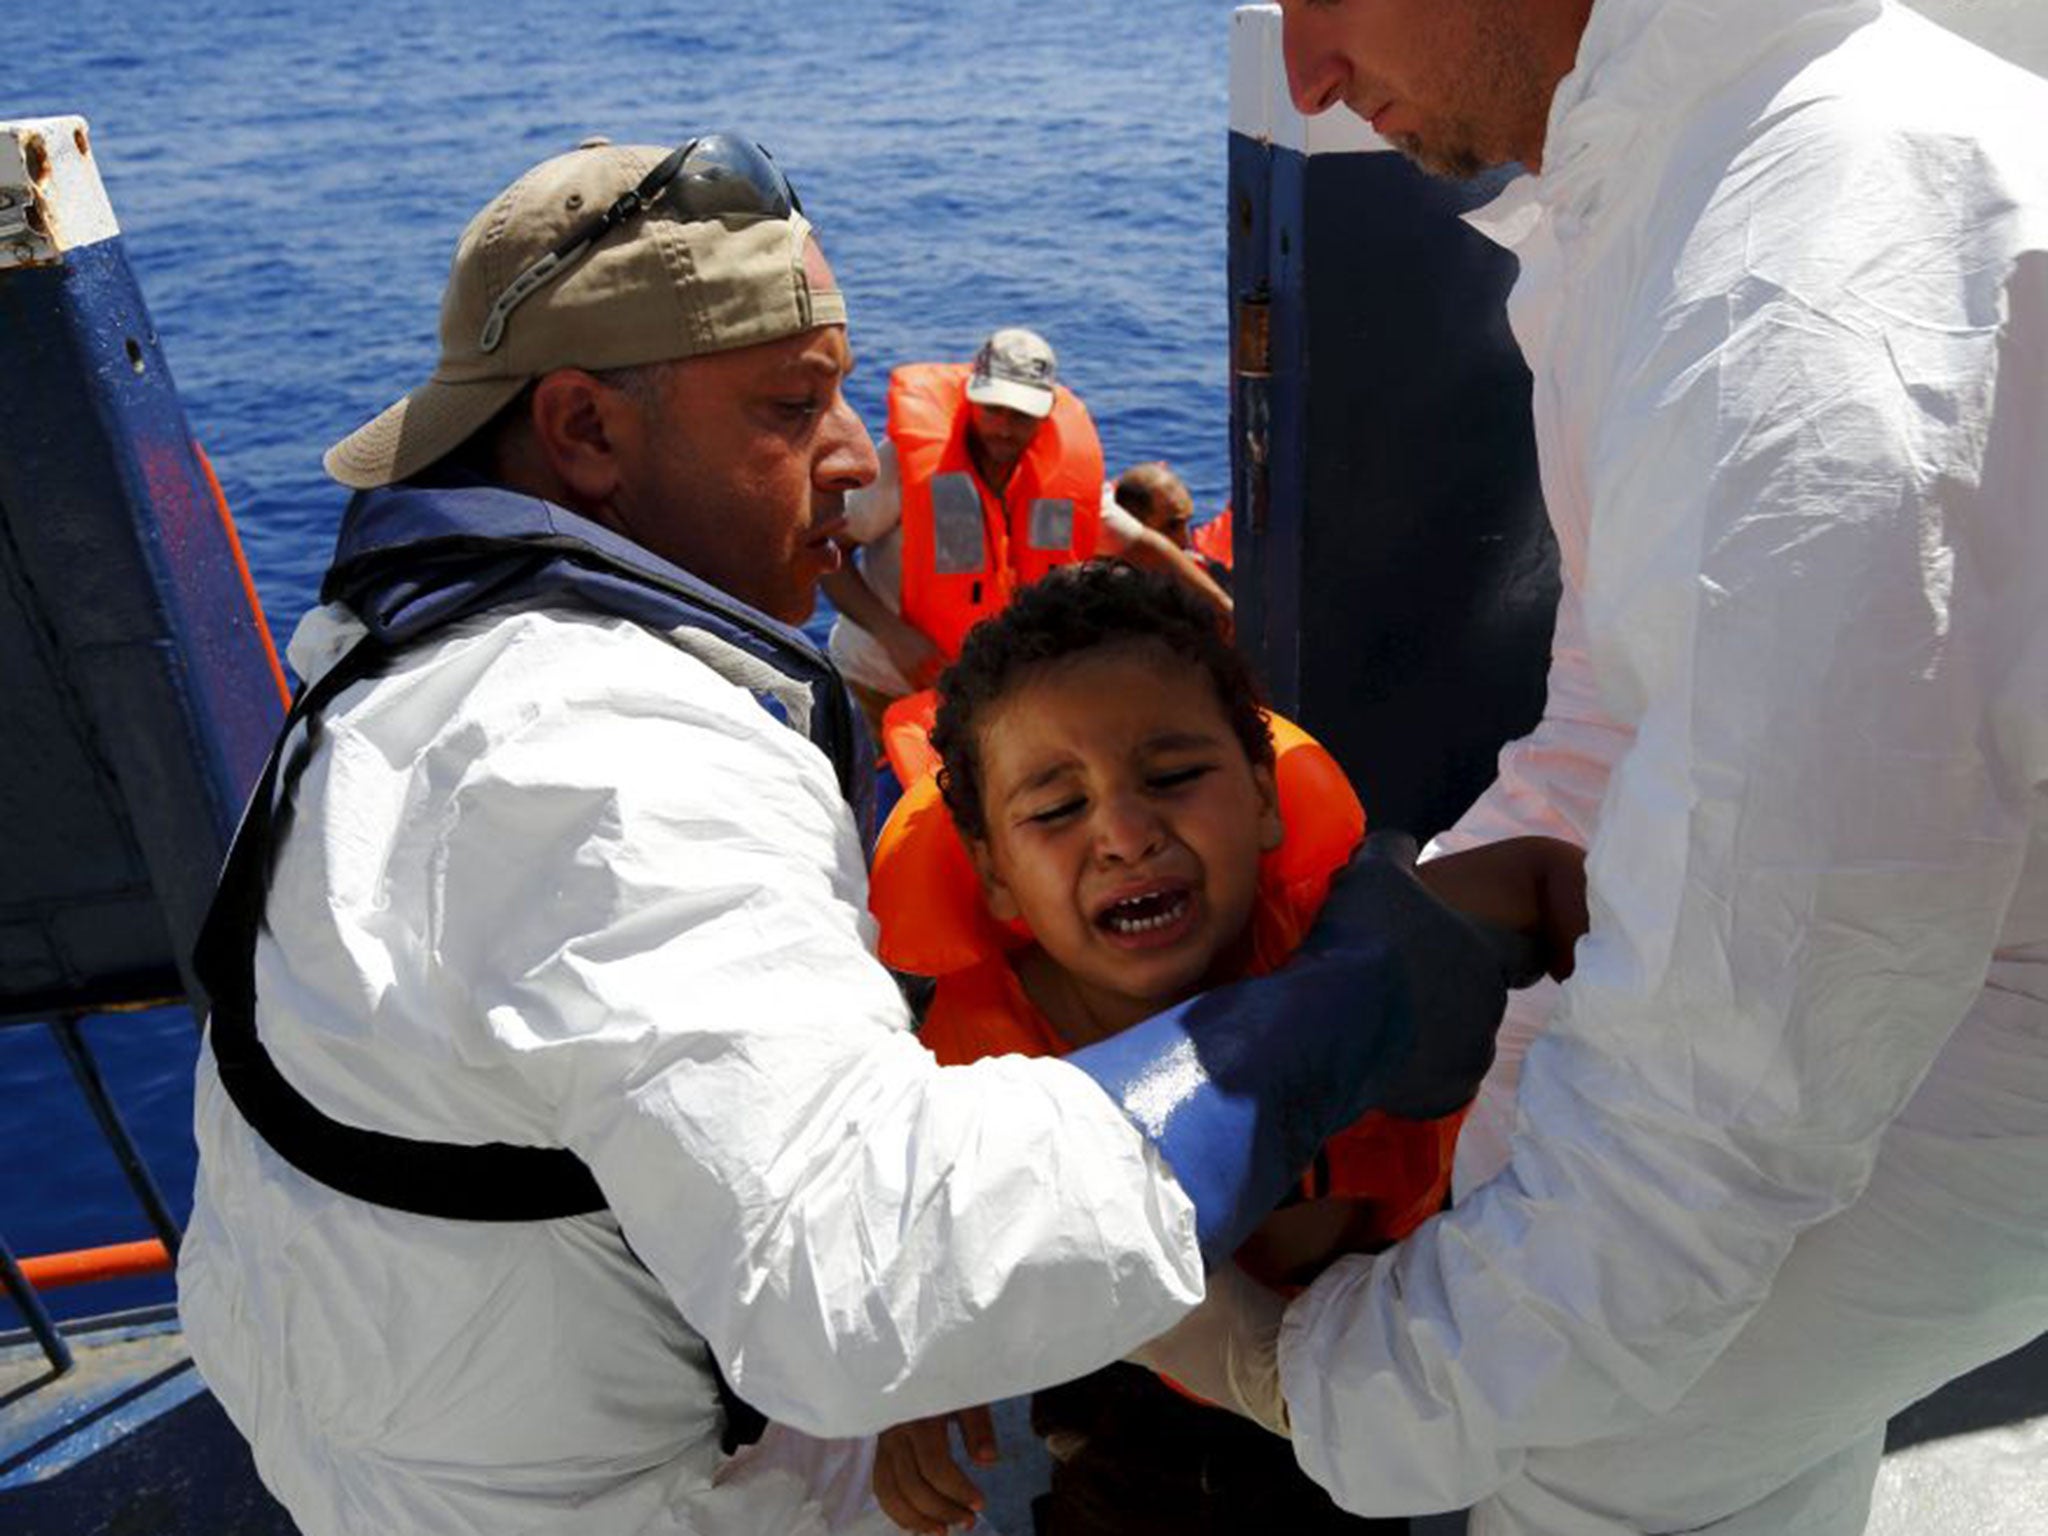 The captain has co-founded a humanitarian group aiming to take its own rescue boat to the Mediterranean